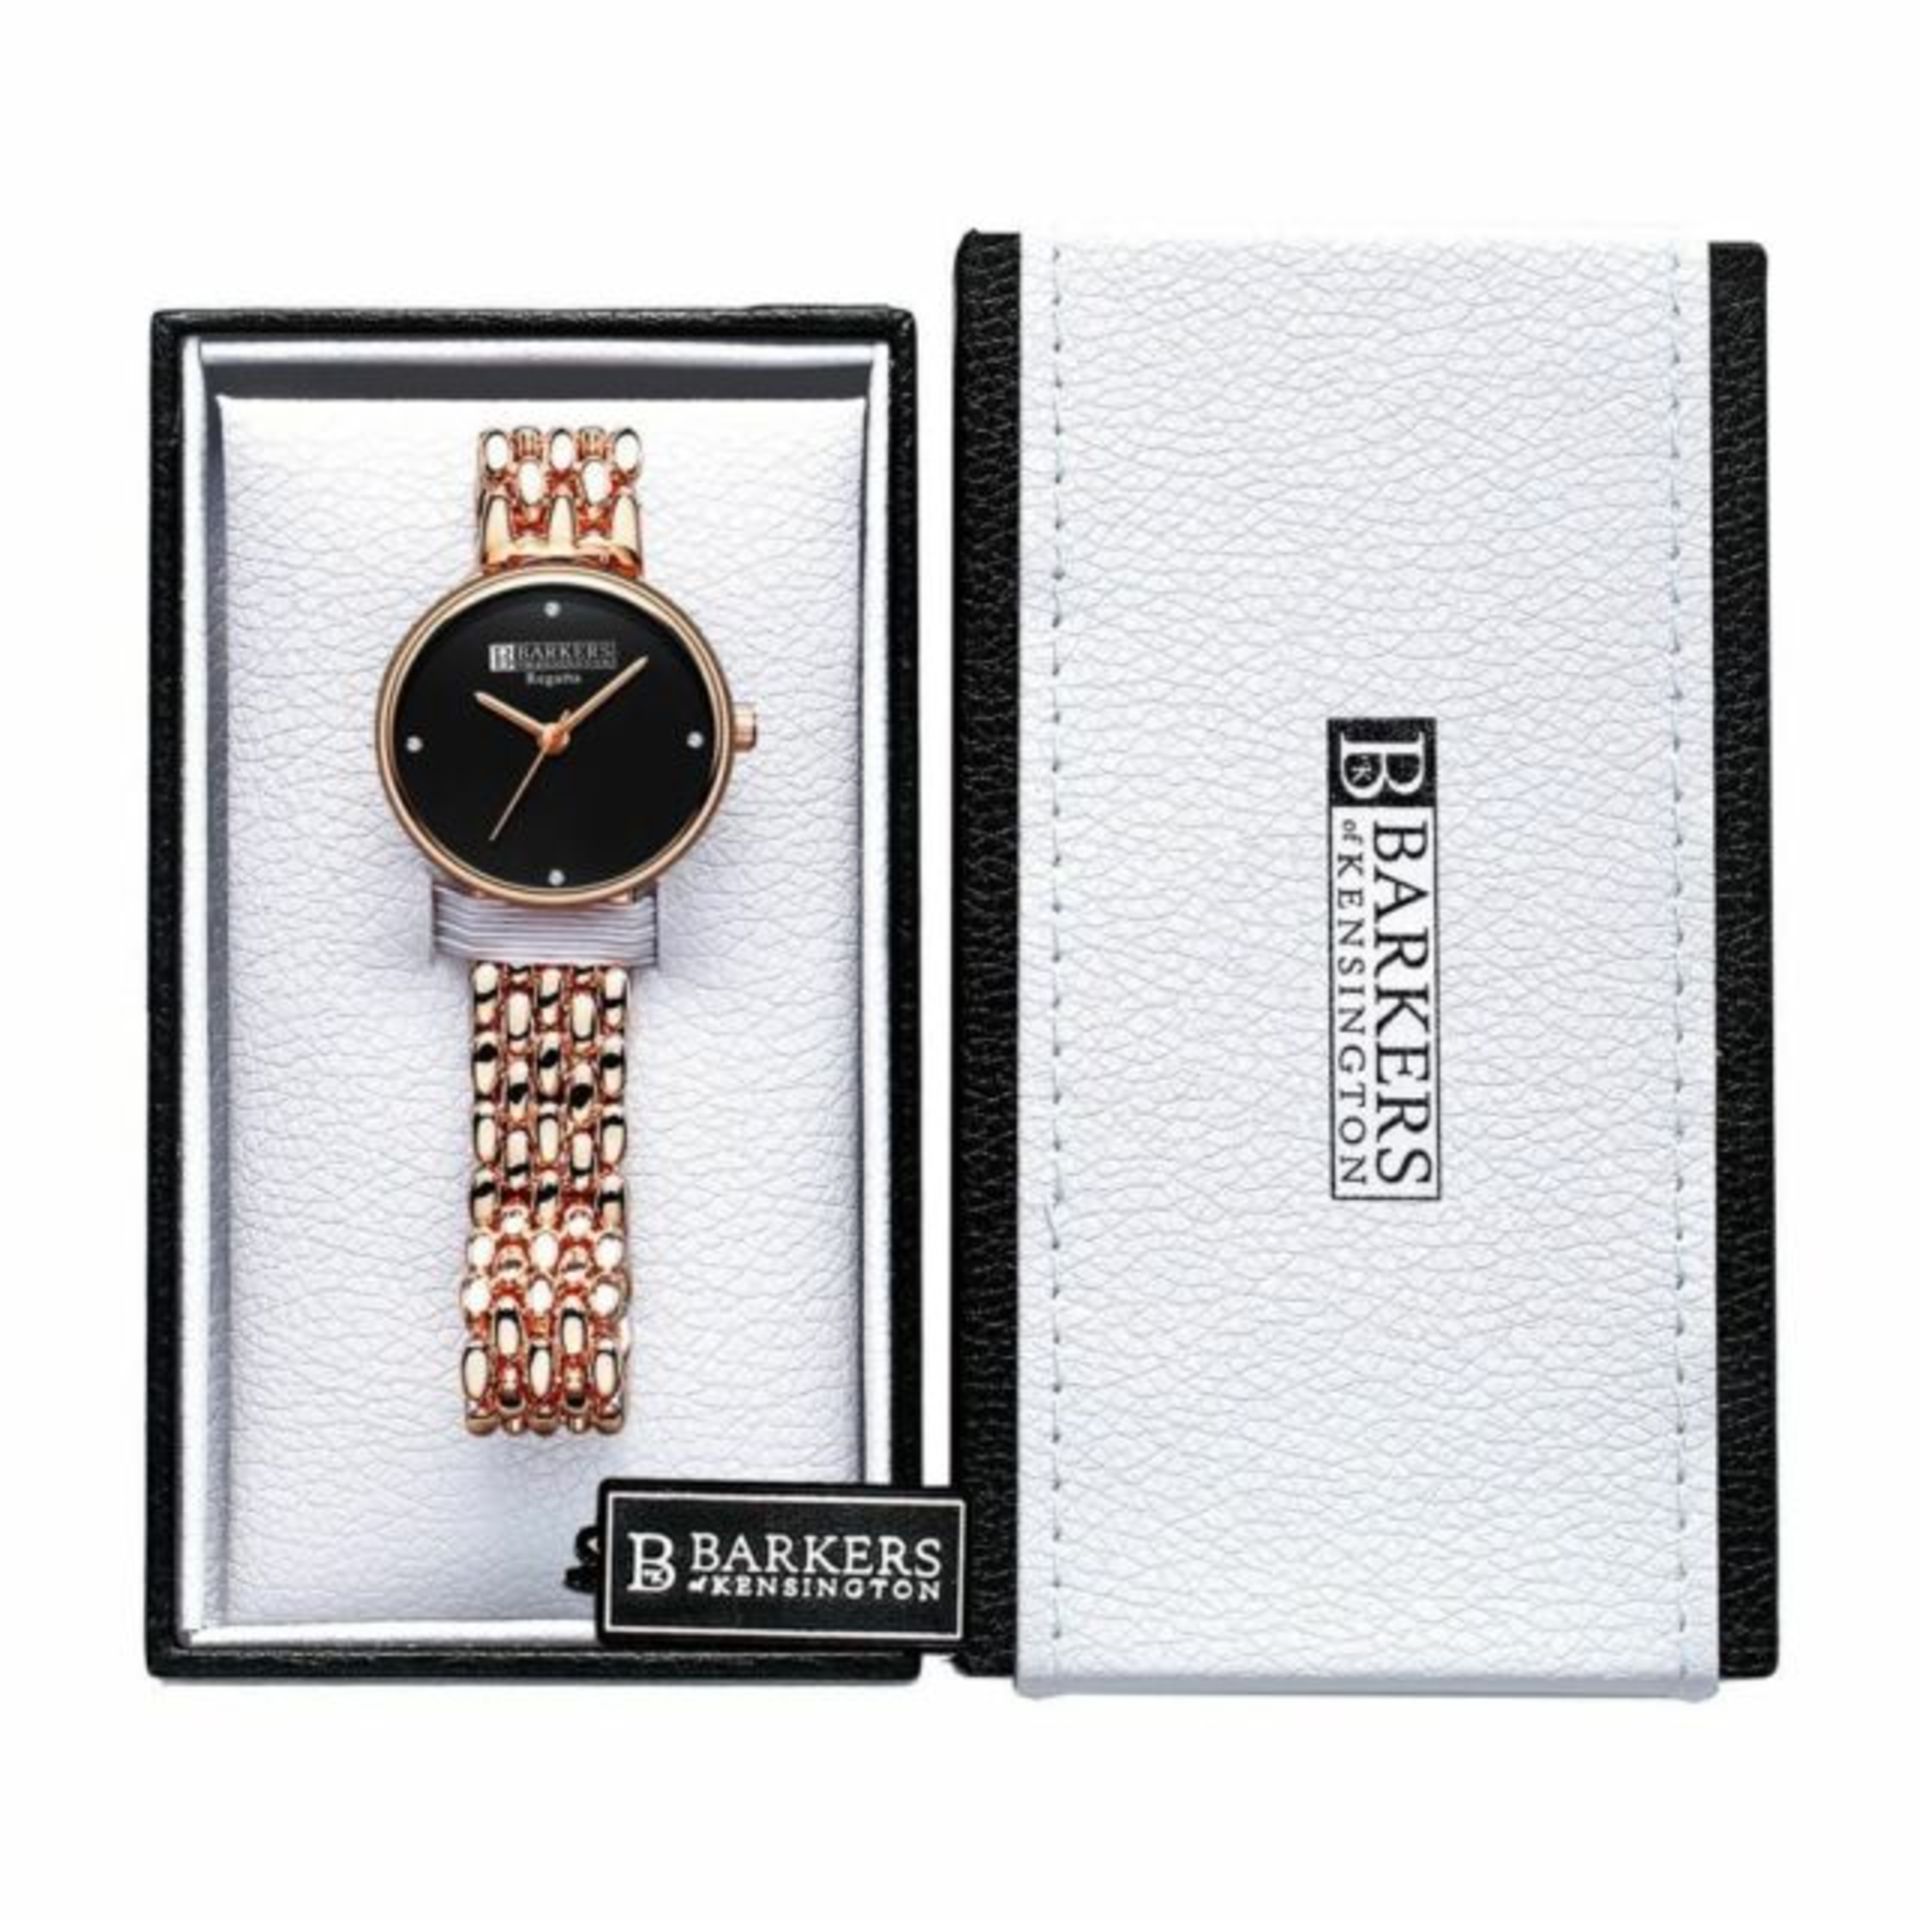 Barkers of Kensington Regatta Black Face with Crystals Women's stylish Watch, new and boxed. - Image 3 of 4